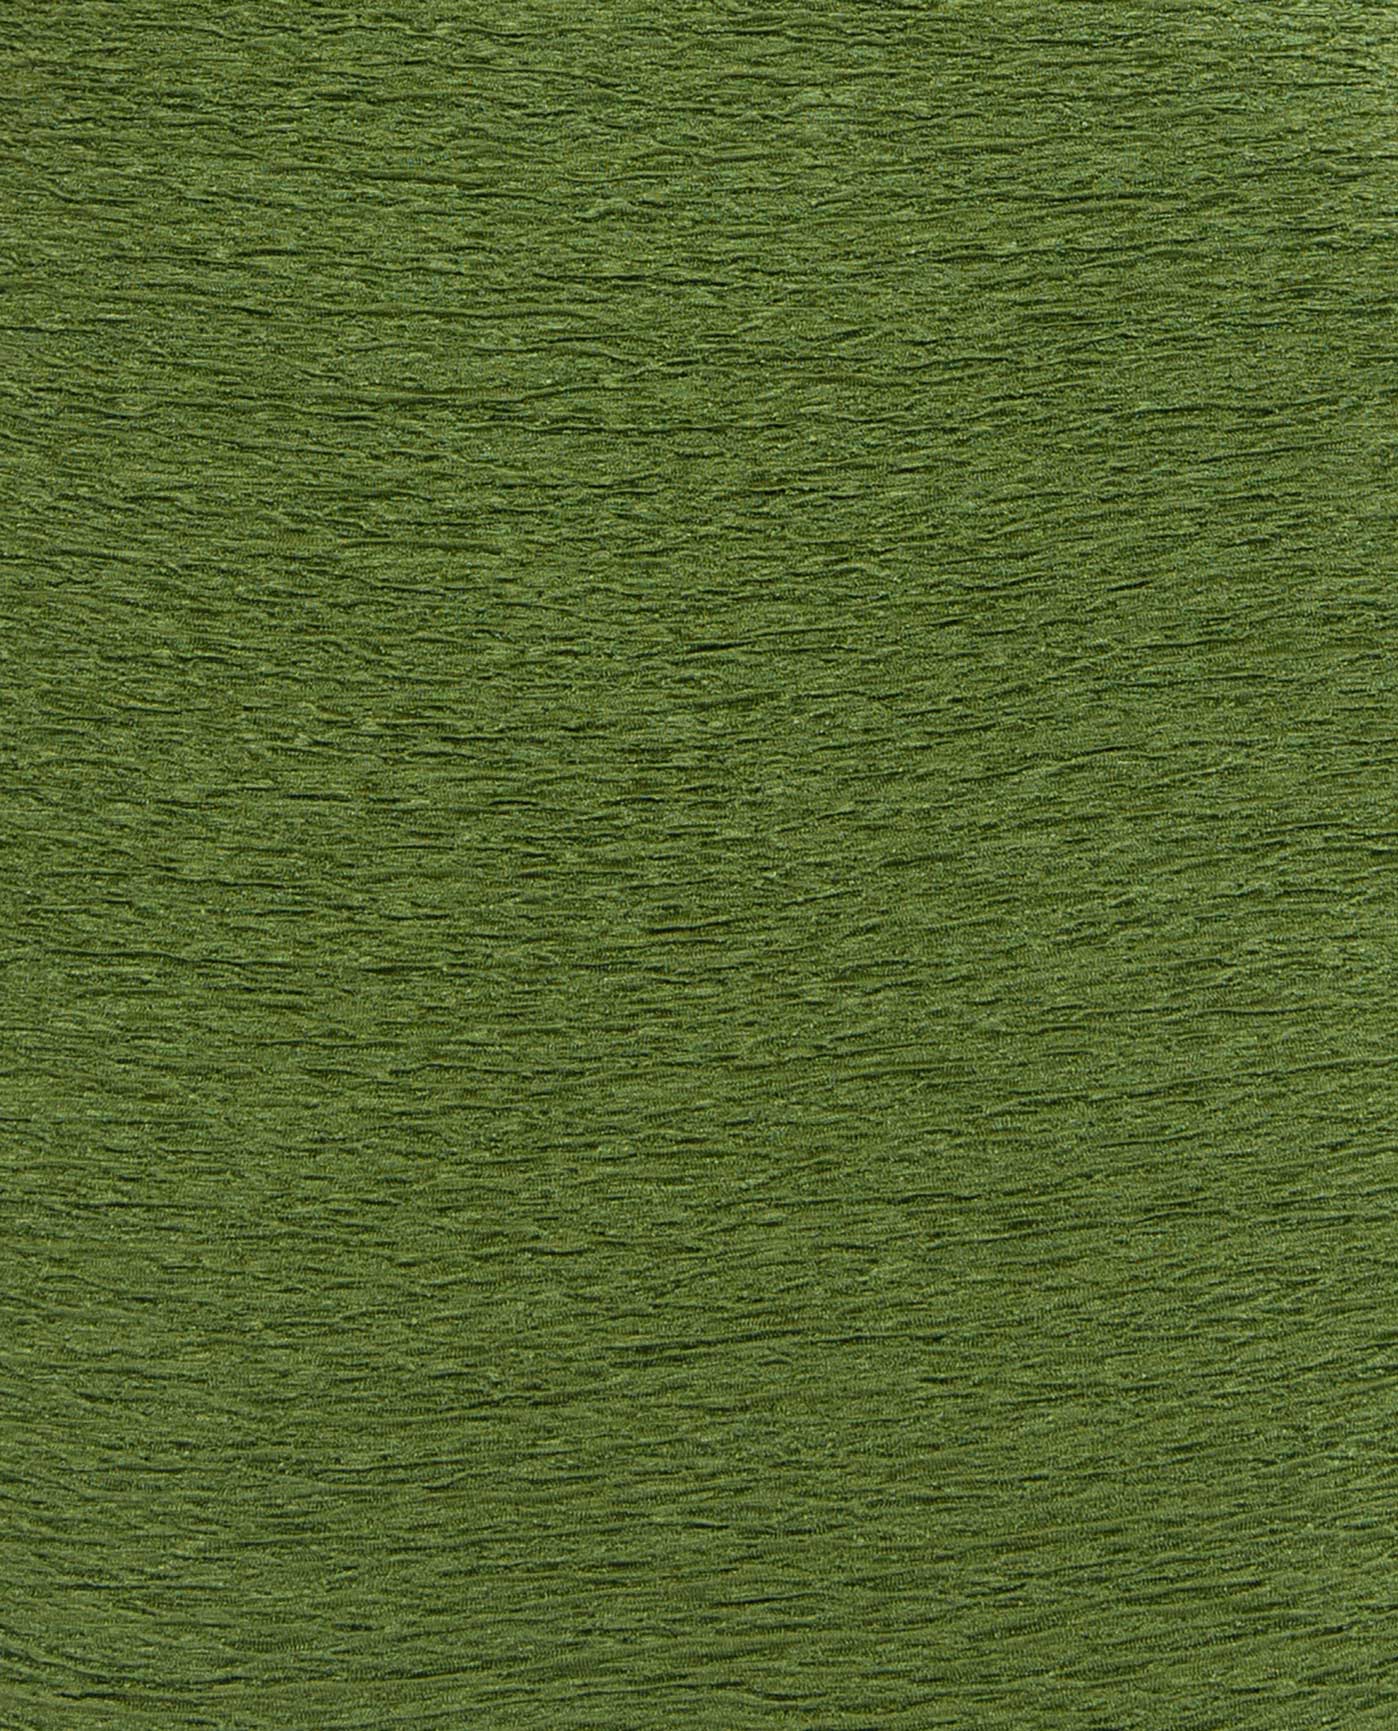 FABRIC DETAIL VIEW OF CHLORINE RESISTANT KRINKLE TEXTURED SOLID HIGH NECK ONE PIECE | KRINKLE OLIVE